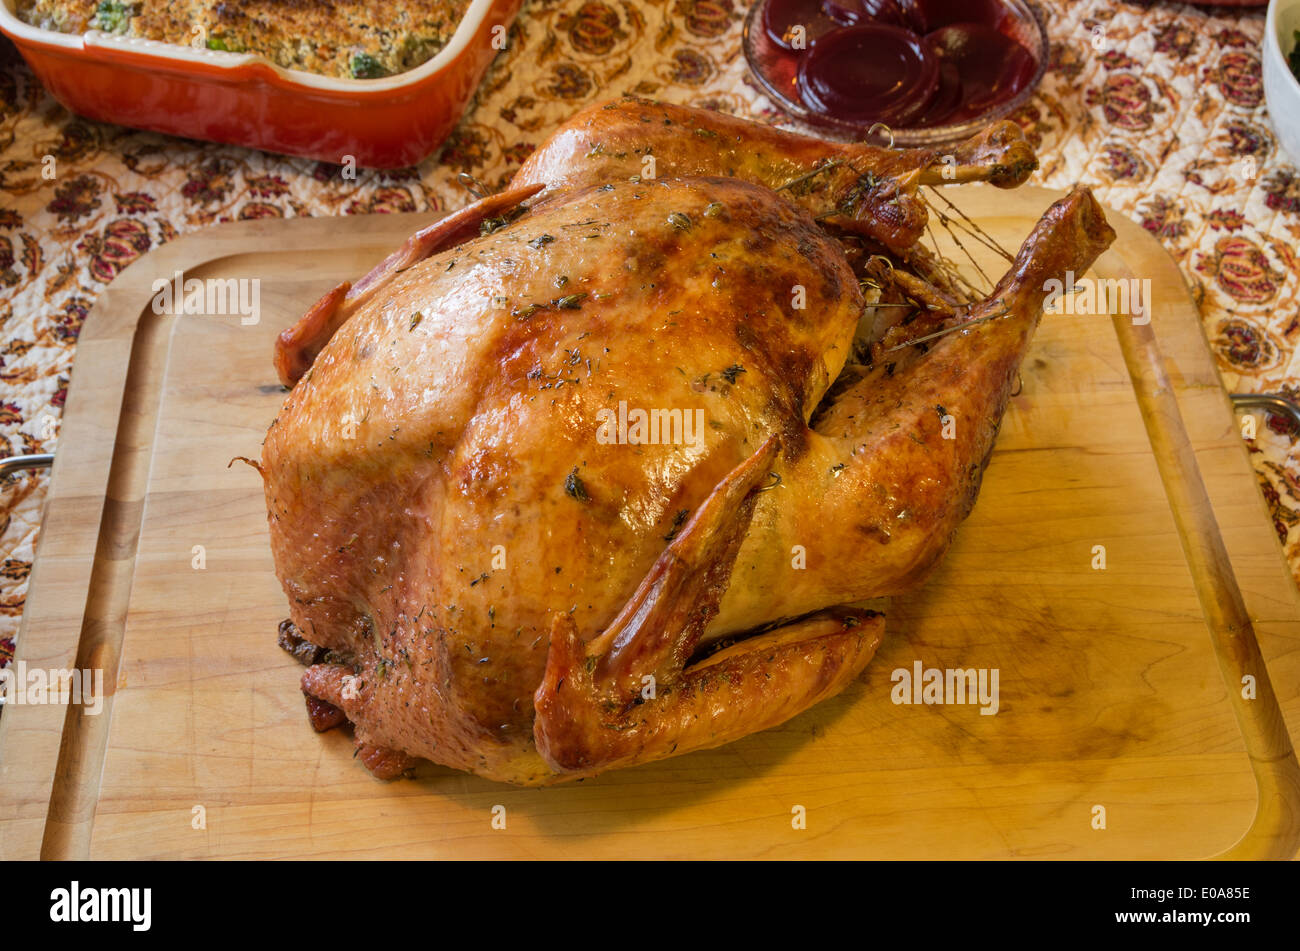 roast turkey on a wooden platter with some side dishes visible Stock Photo